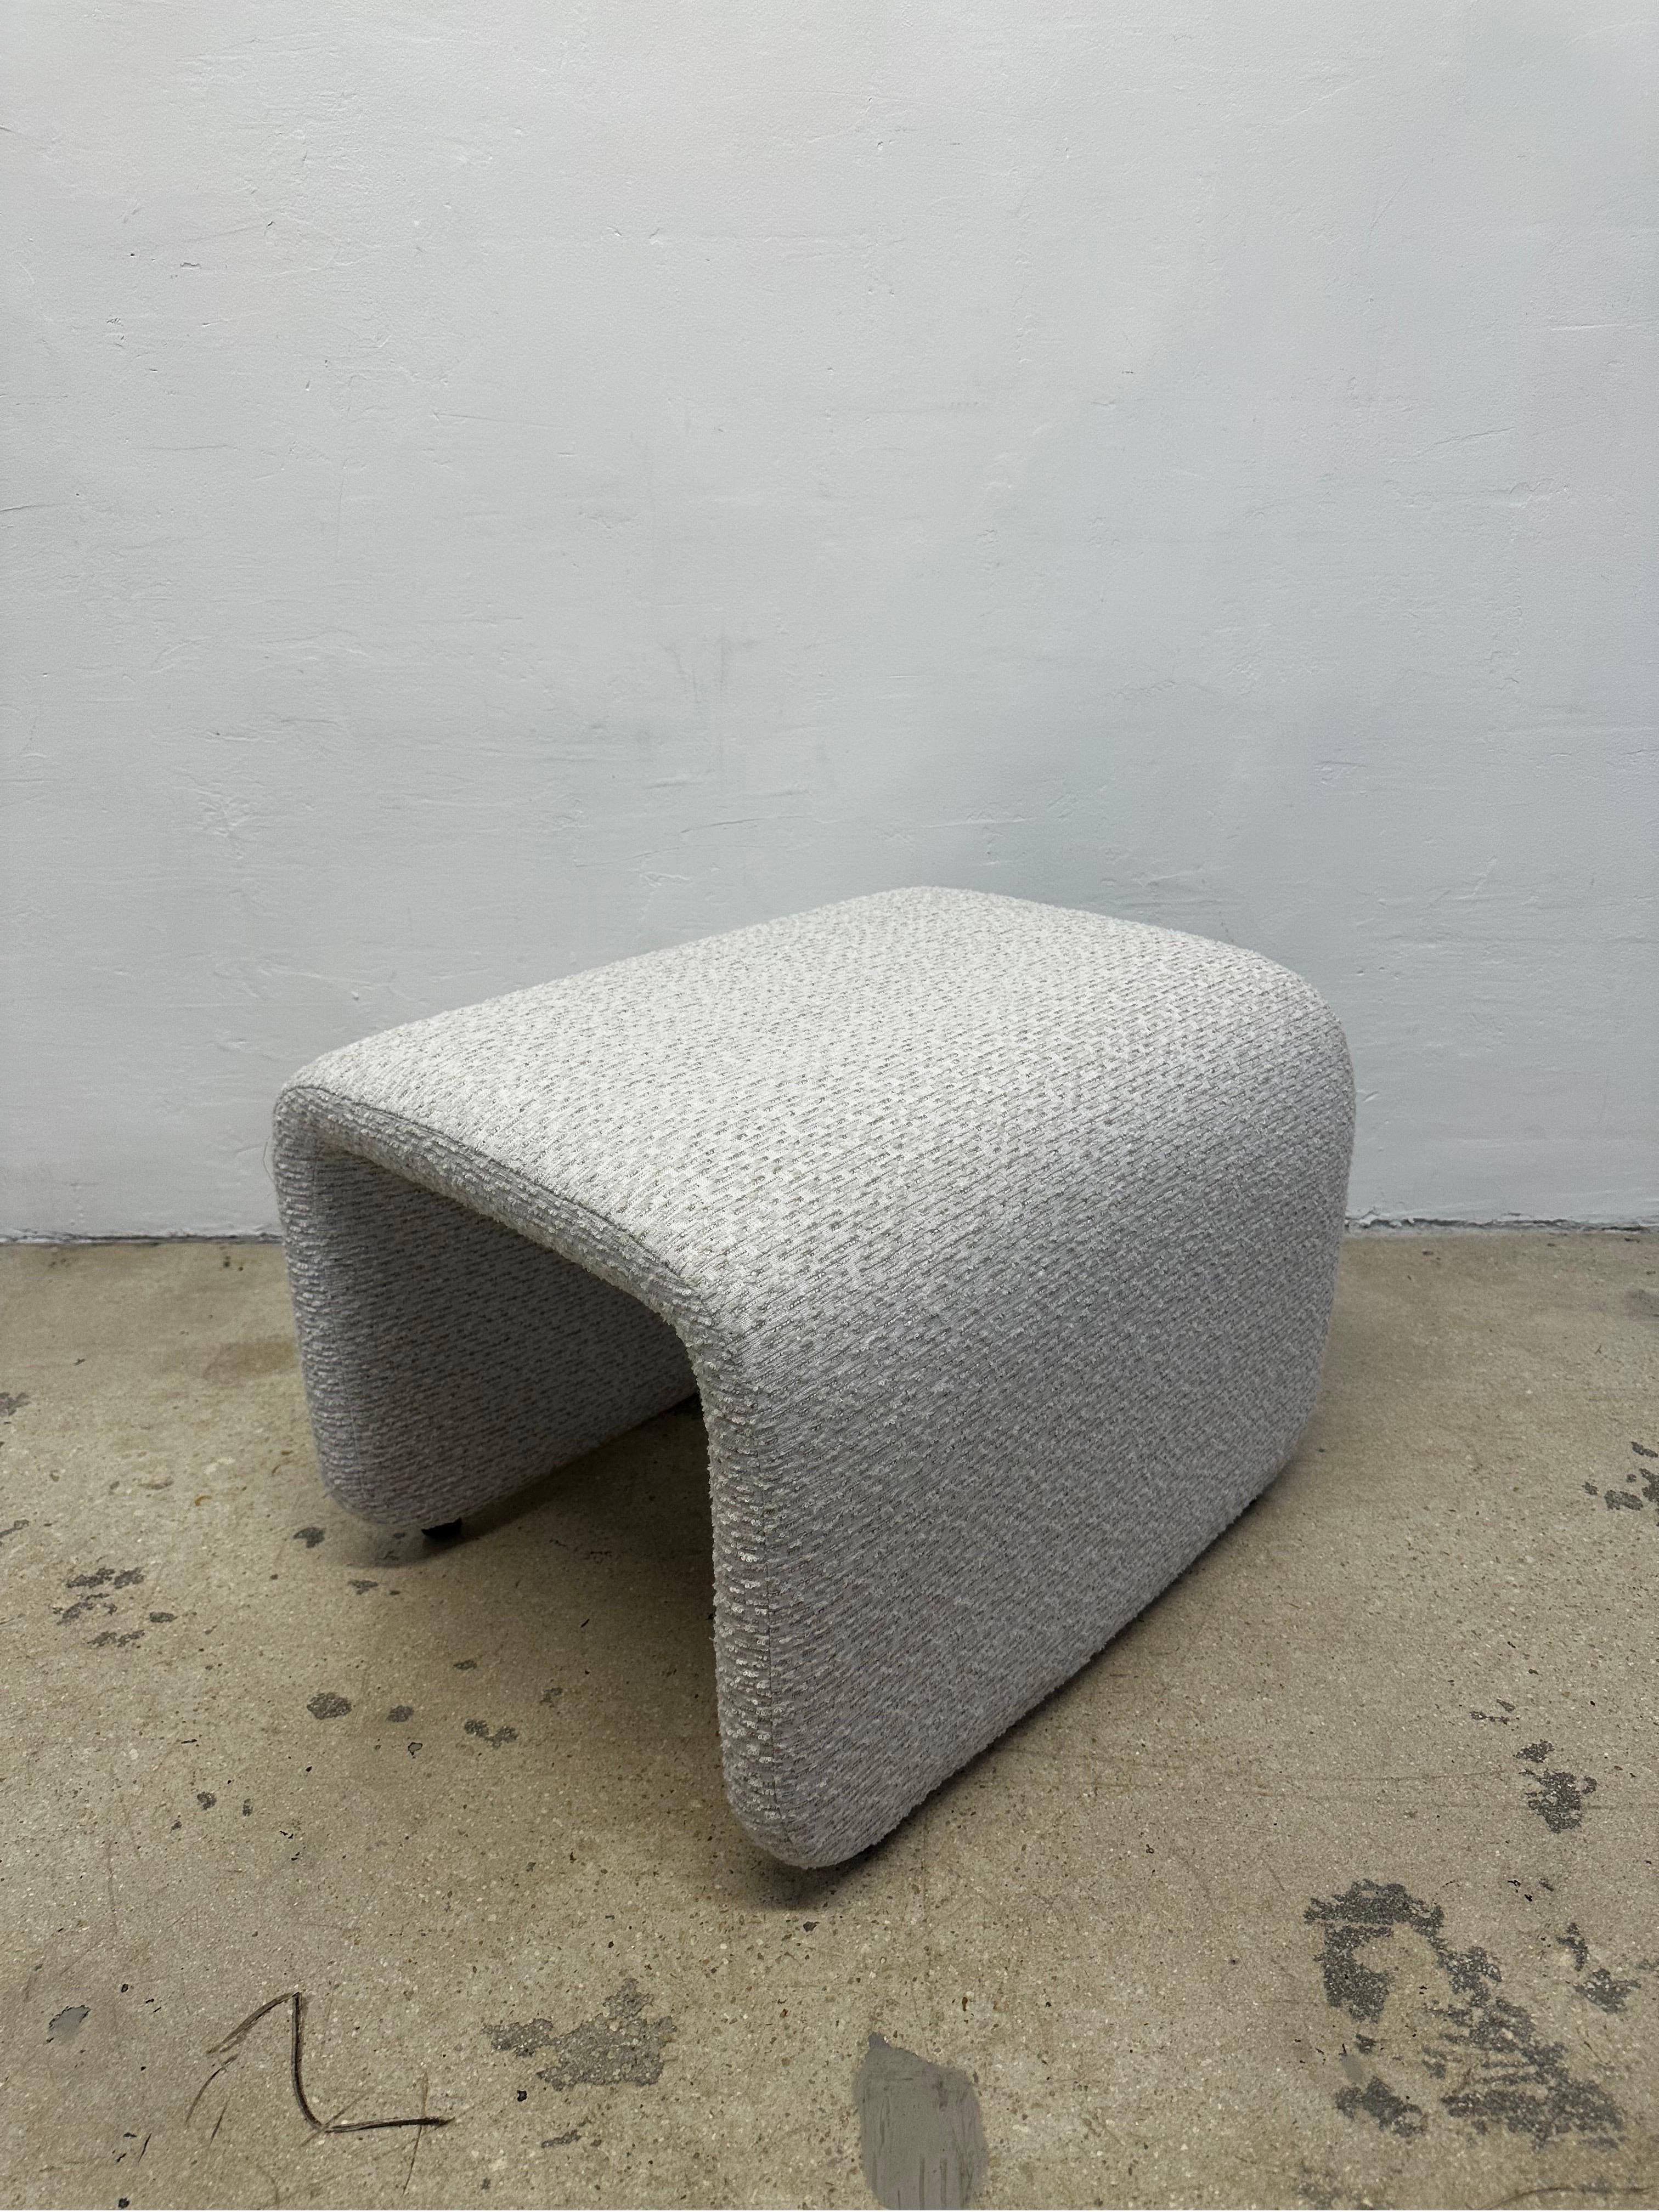 Fabric Jan Ekselius “Etcetera” Lounge Chair and Footrest for Joc, Sweden 1970s